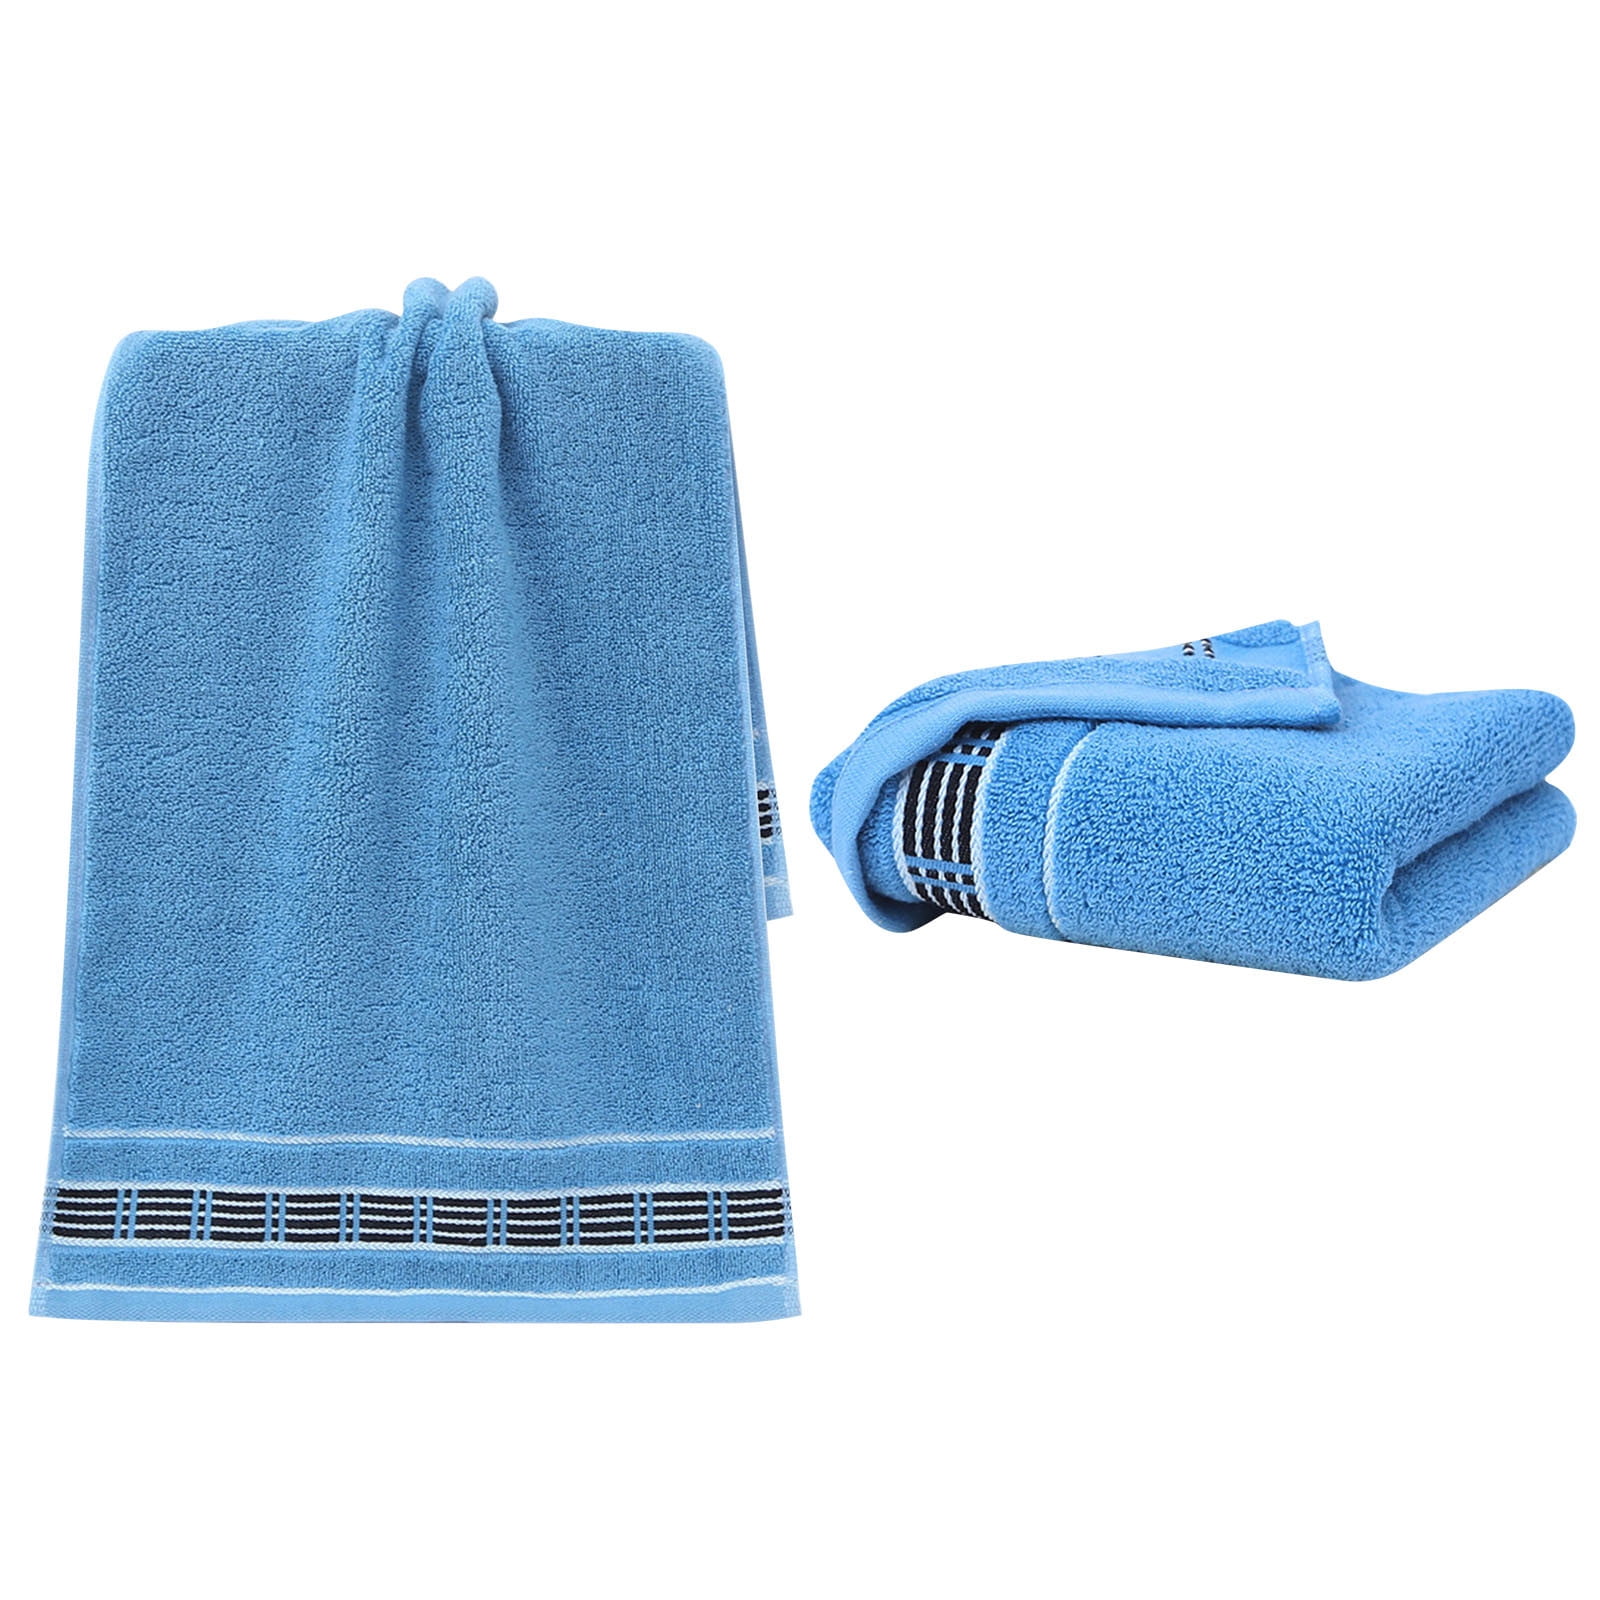 LE Bath Towel, Hand Towel, & Body/Face Pack (pack of 3), marine